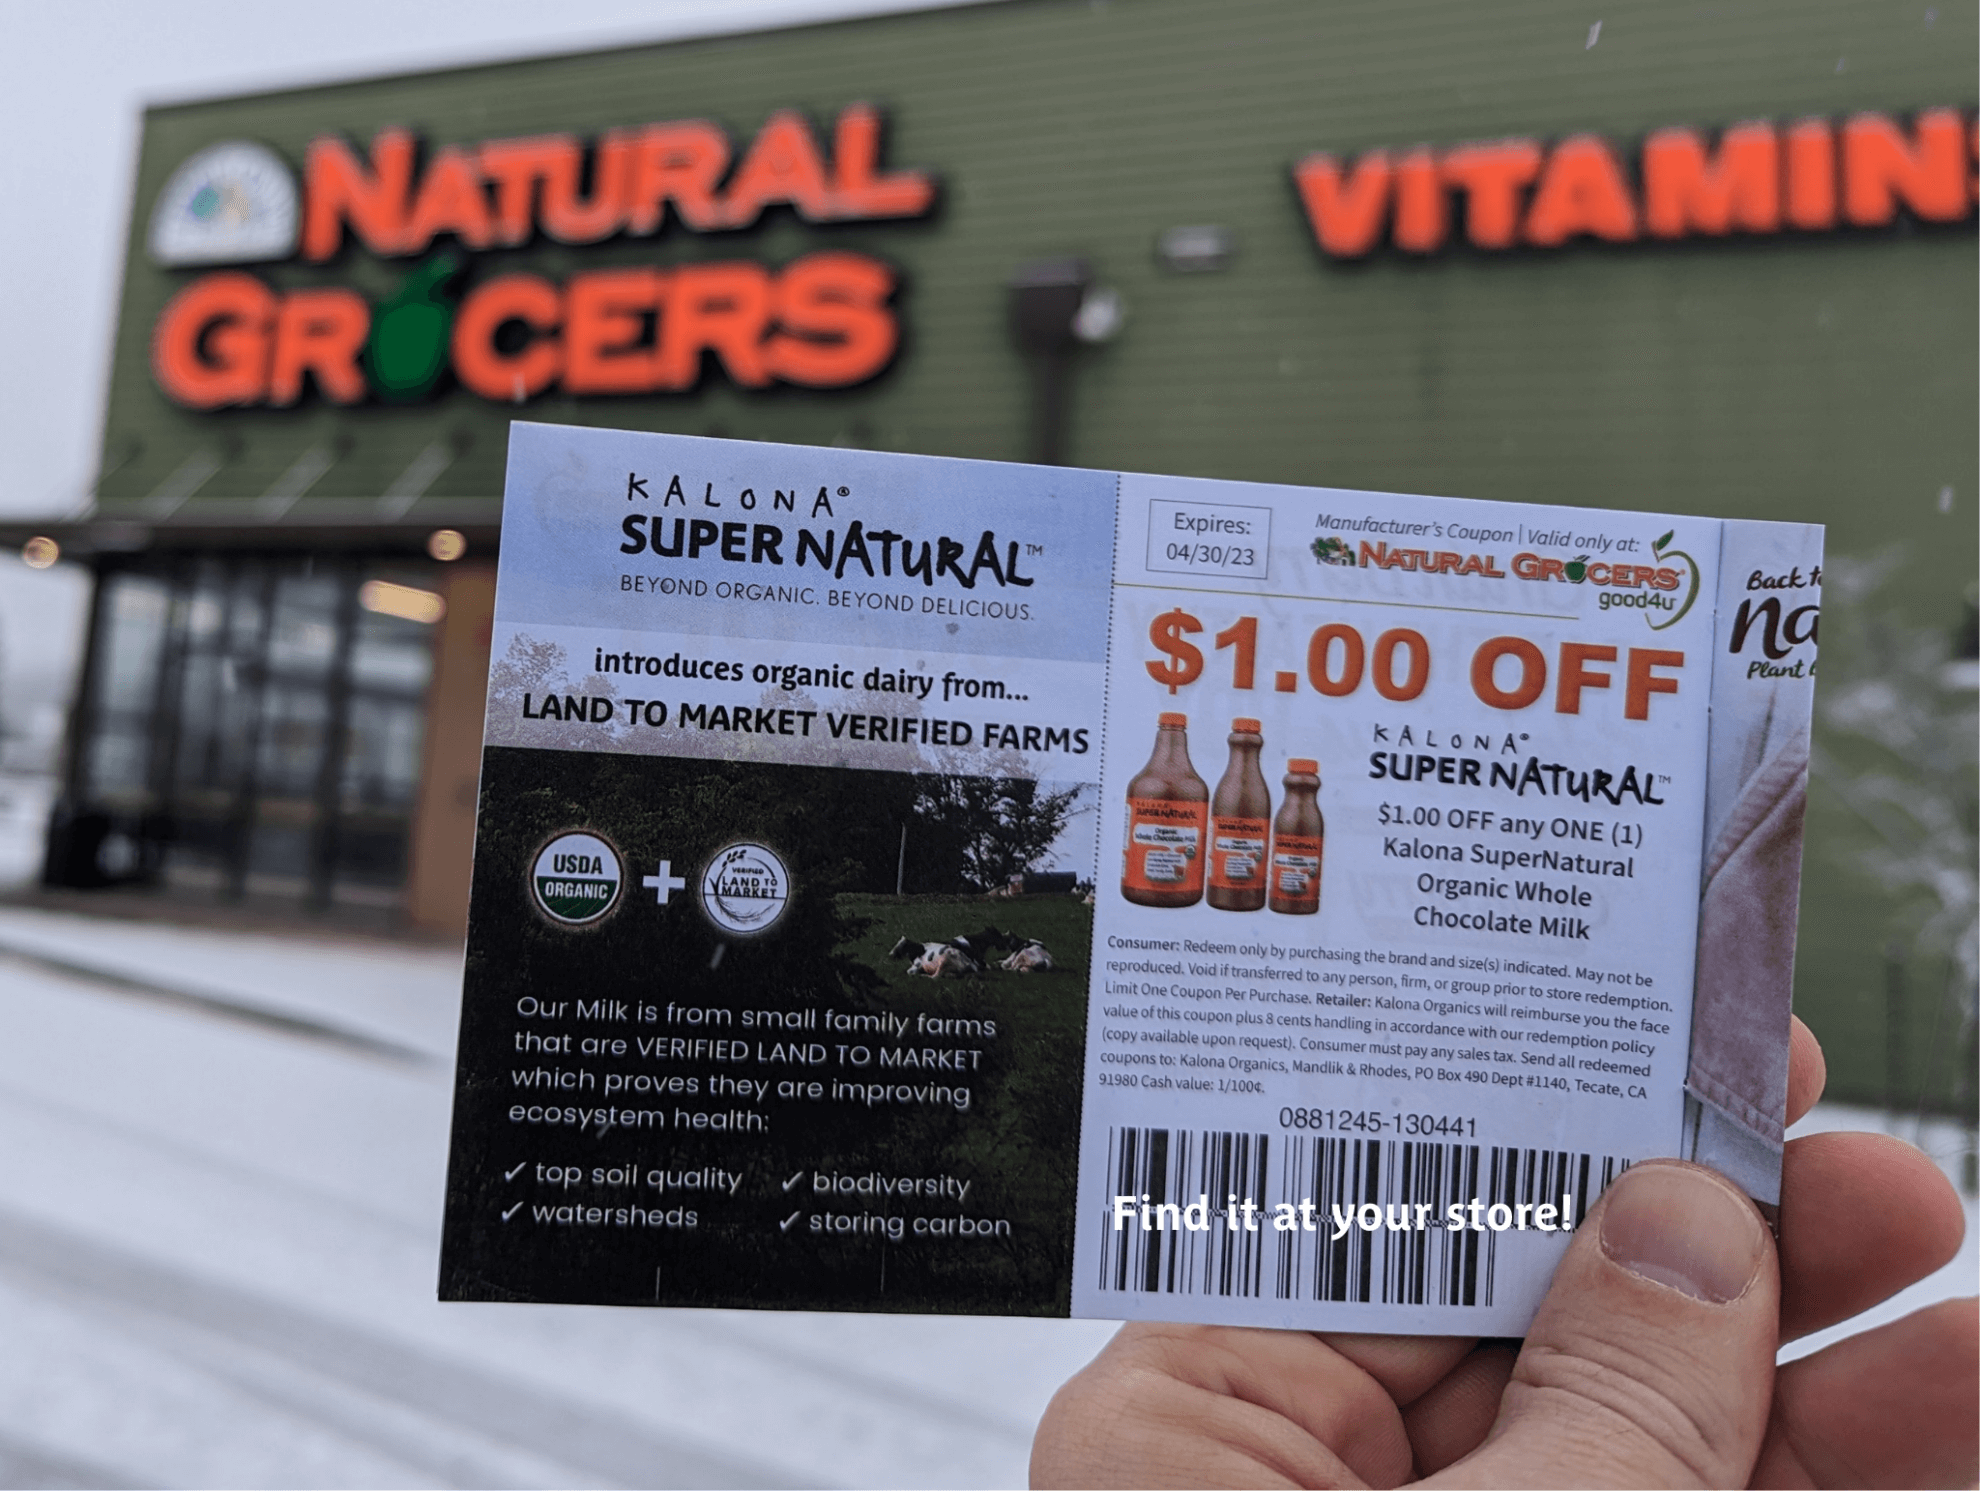 Kalona SuperNatural $1 Off Coupon held in front of Natural Grocers store